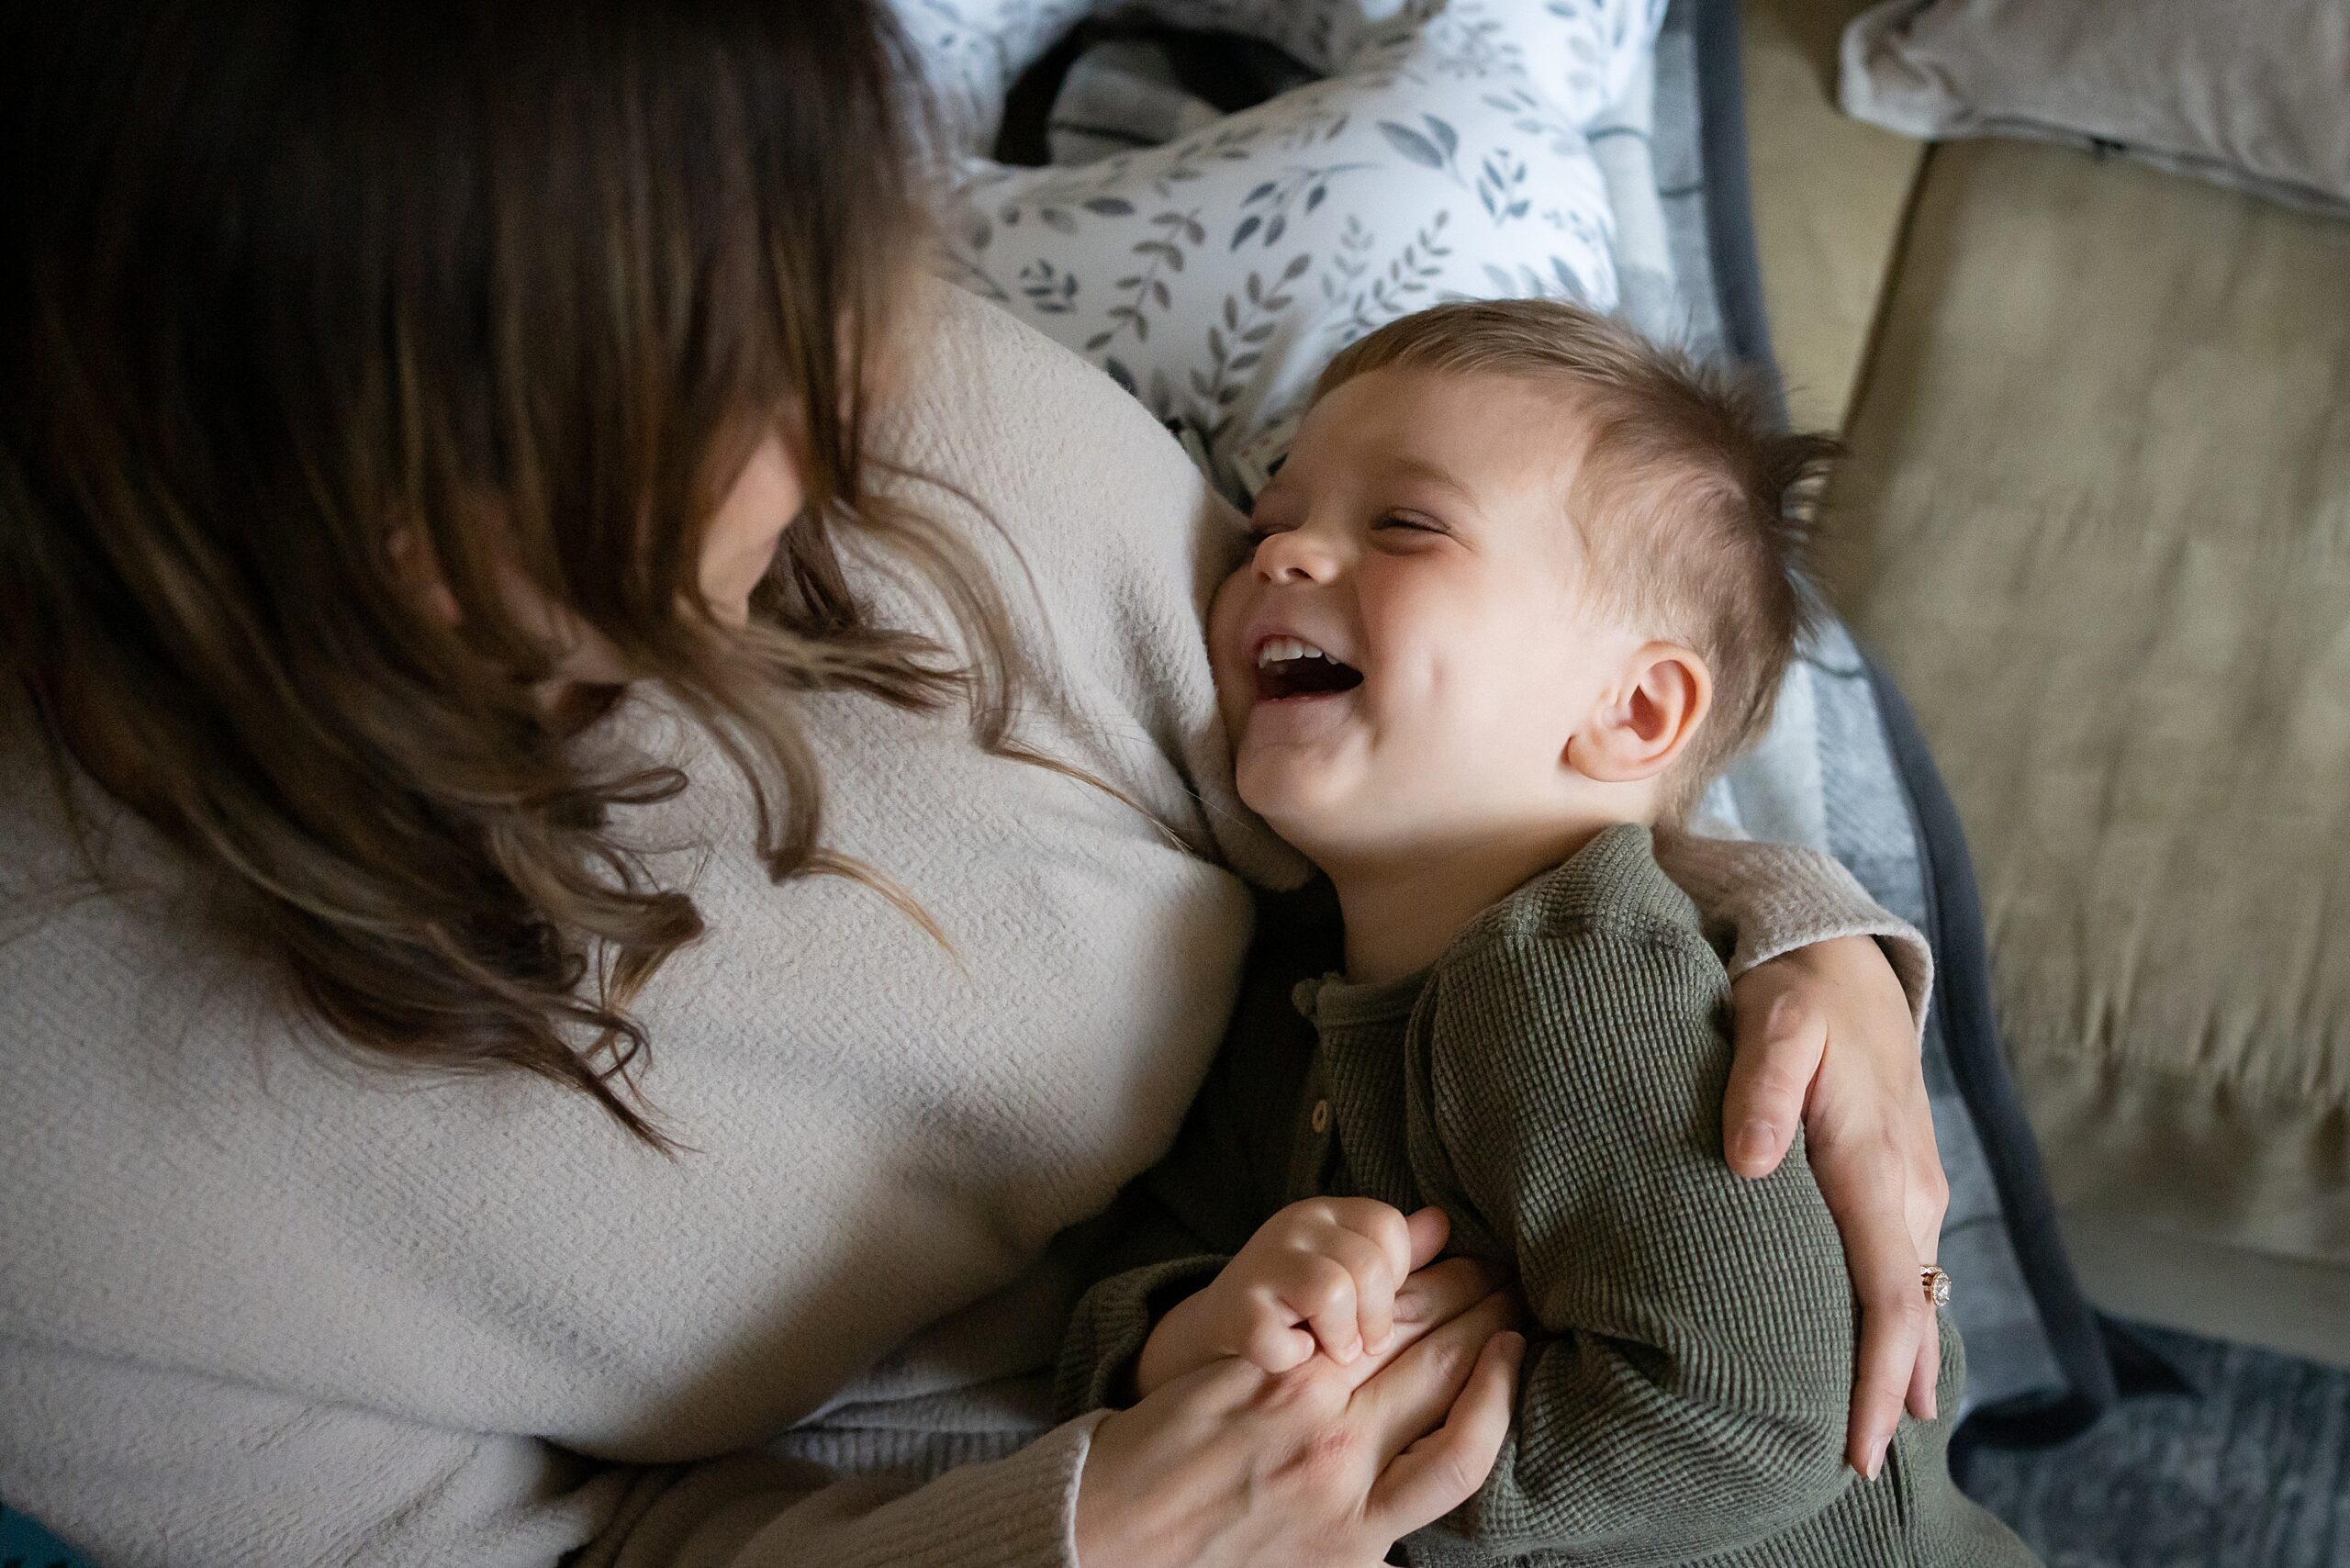 A joyful toddler laughing in the embrace of an adult, most likely their mother, in a cozy indoor setting.